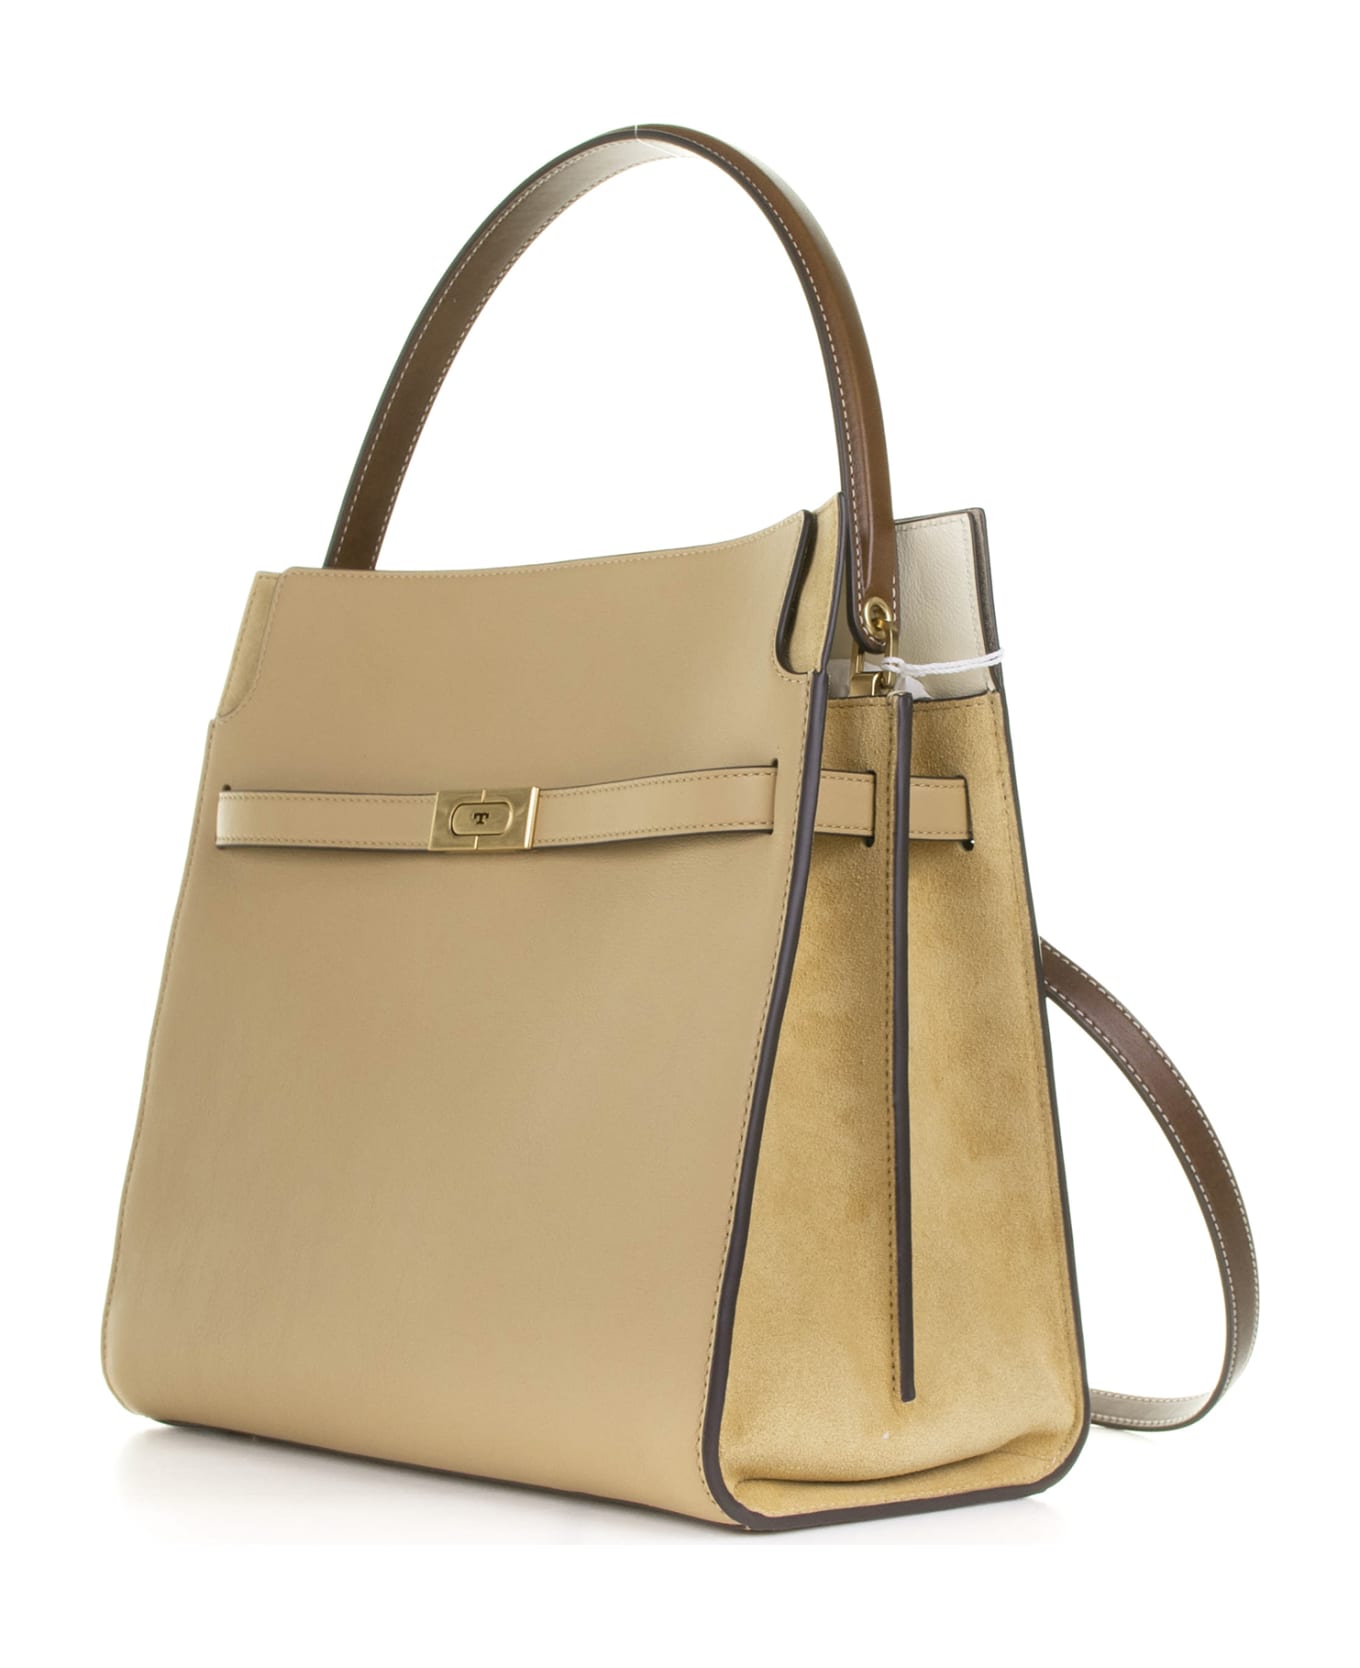 Tory Burch Double Lee Radziwill Bag In Leather - DARK SAND